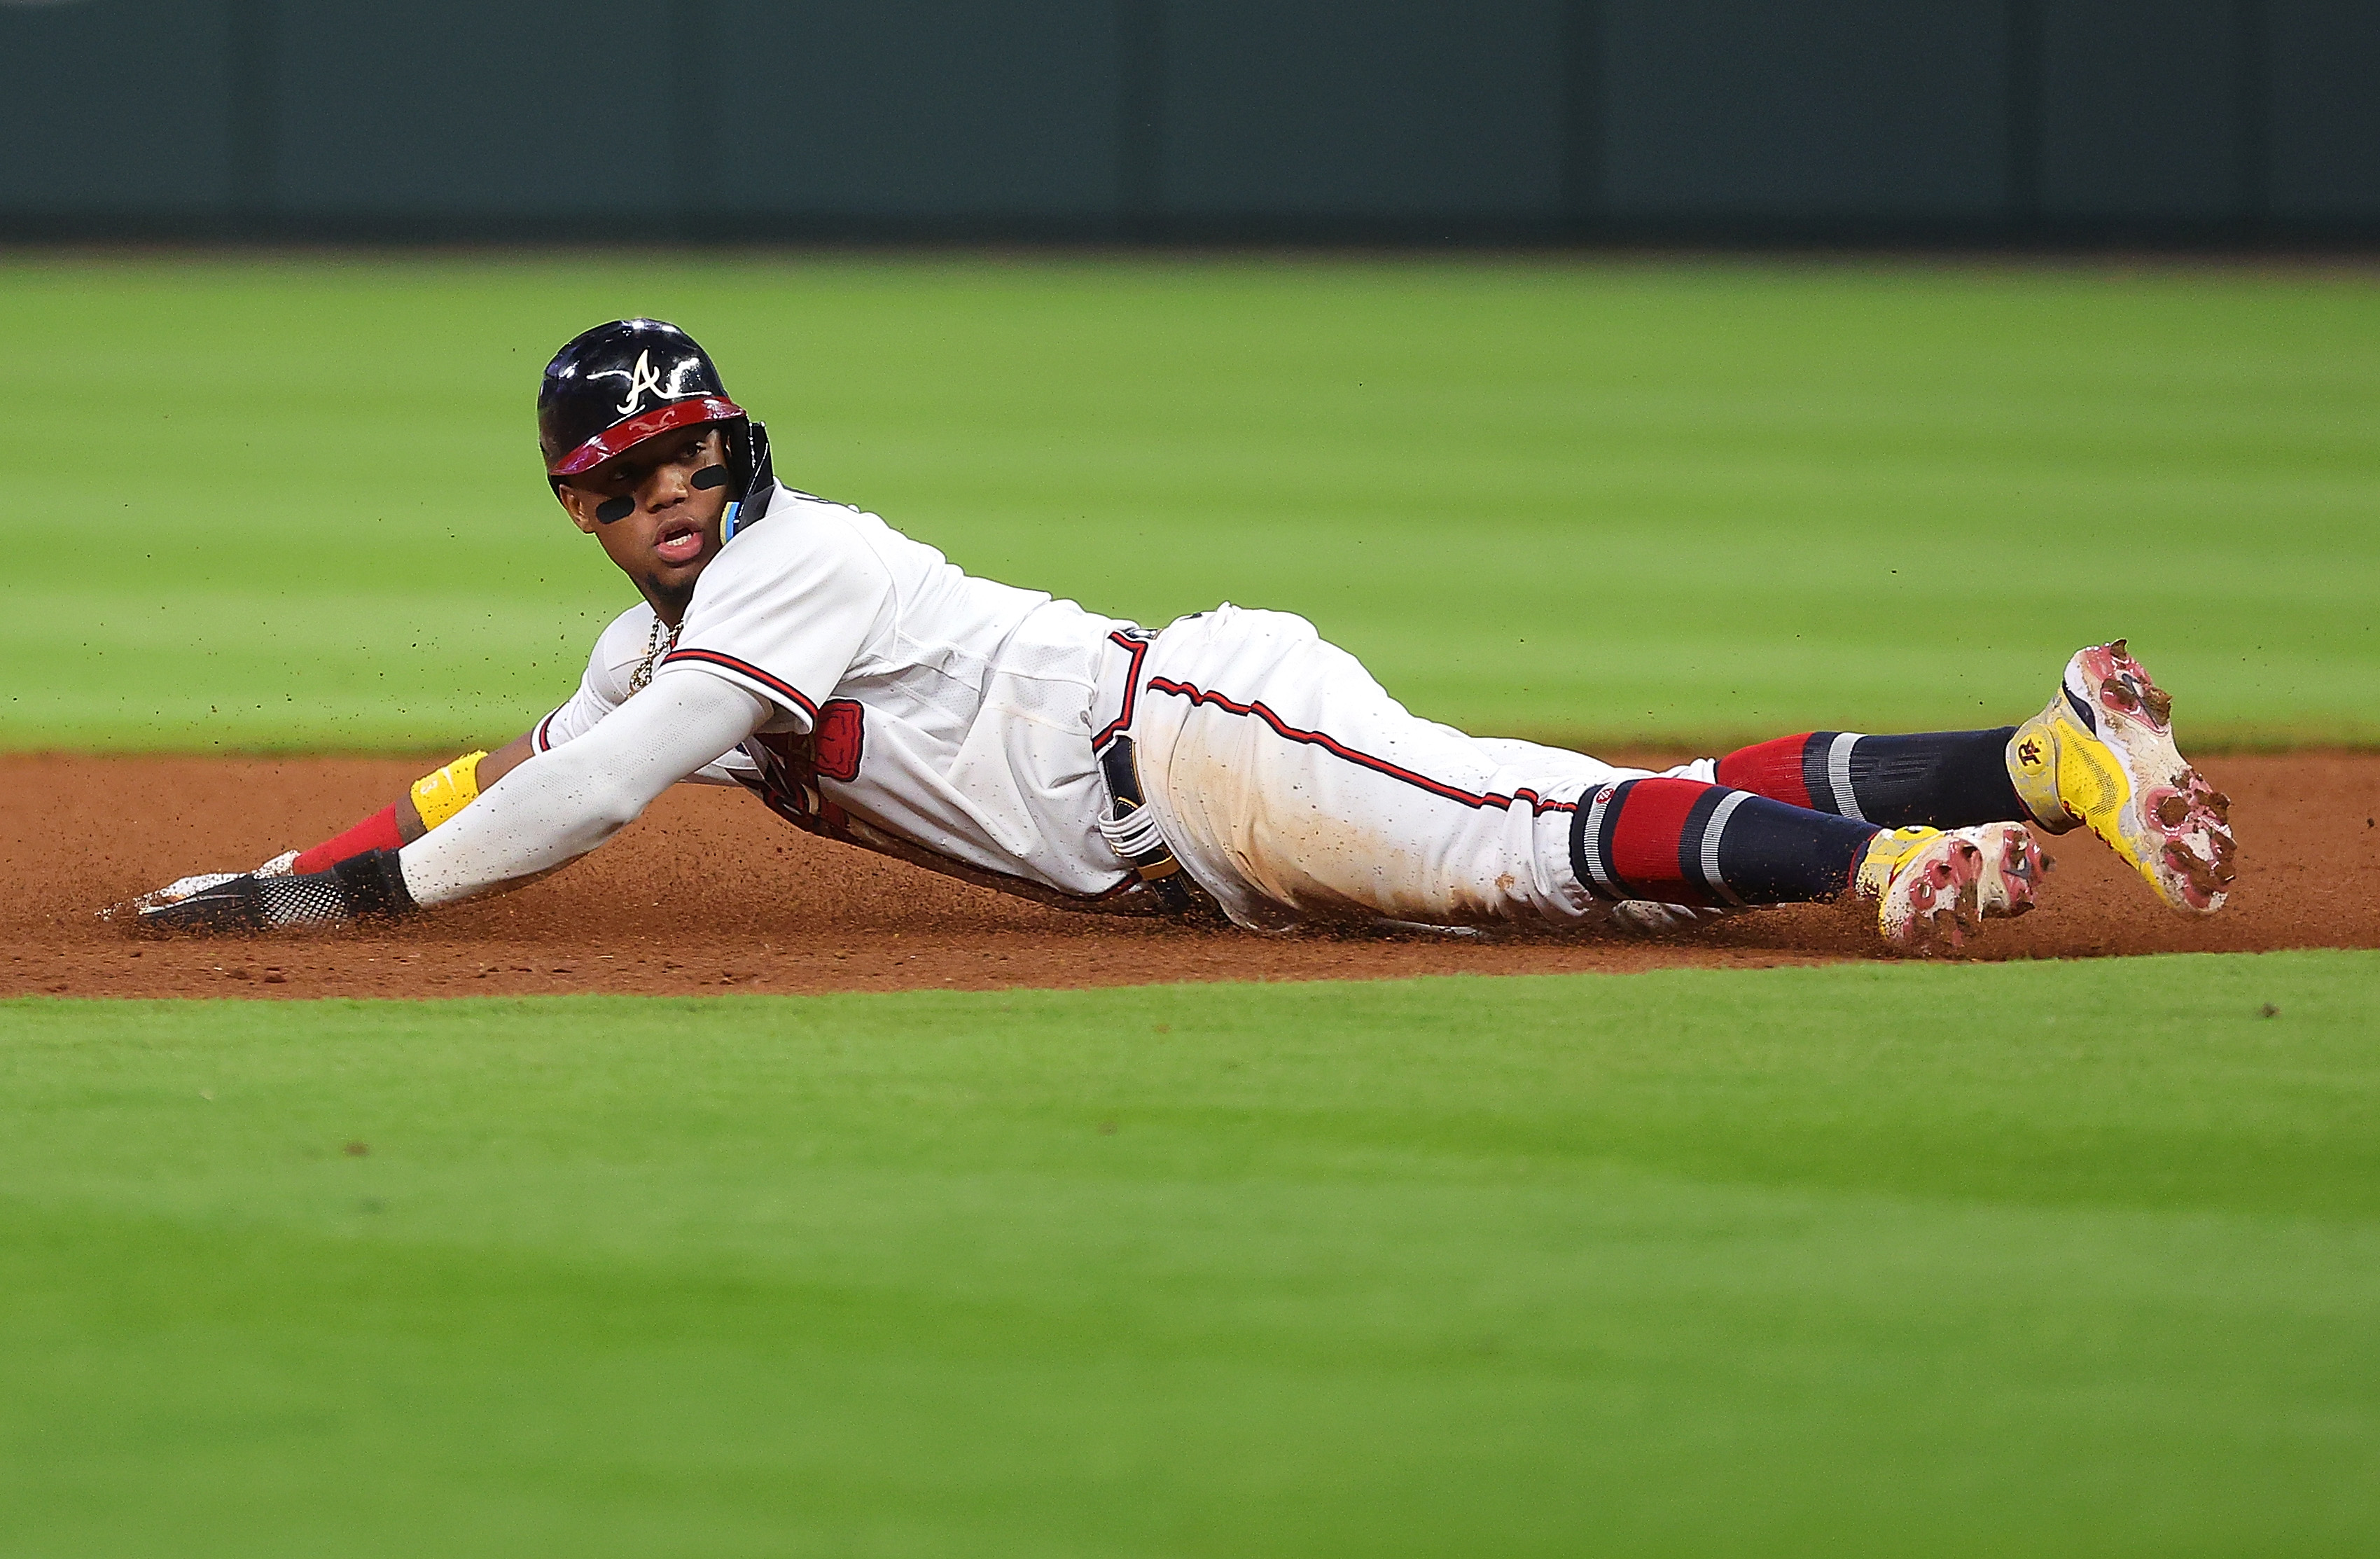 Ronald Acuna Jr. #13 of the Atlanta Braves looks back as he was attempting to steal second base against the Boston Red Sox prior to a single by Matt Olson #28 of the Atlanta Braves in the seventh inning at Truist Park on May 10, 2022 in Atlanta, Georgia.